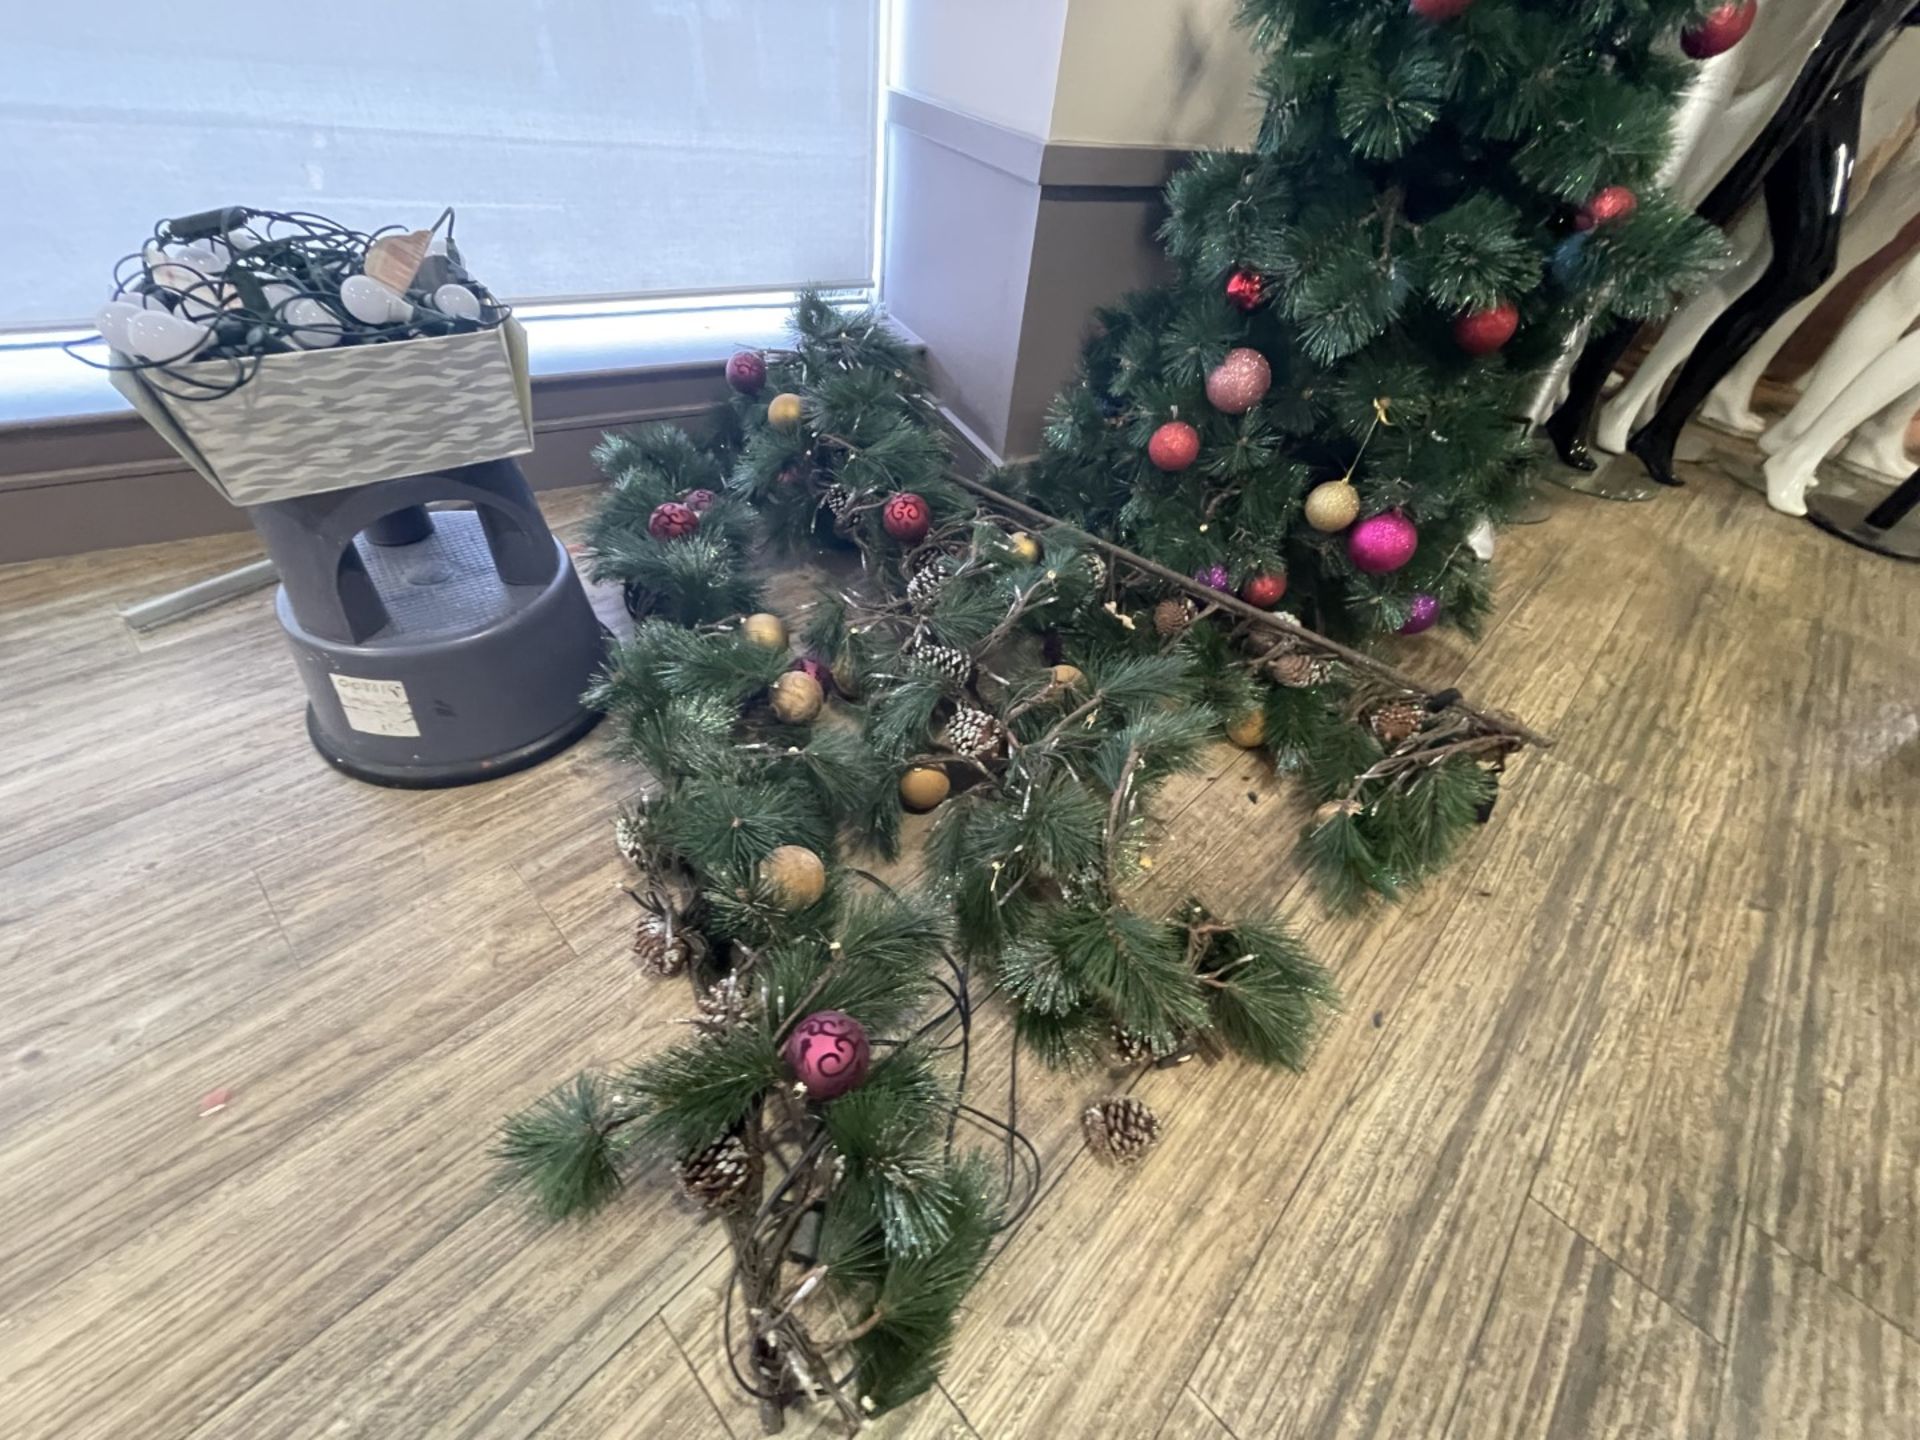 1 x Christmas Tree With Assorted Decorations - CL670 - Ref: GEM213 - Location: Gravesend, DA11 - Image 5 of 10